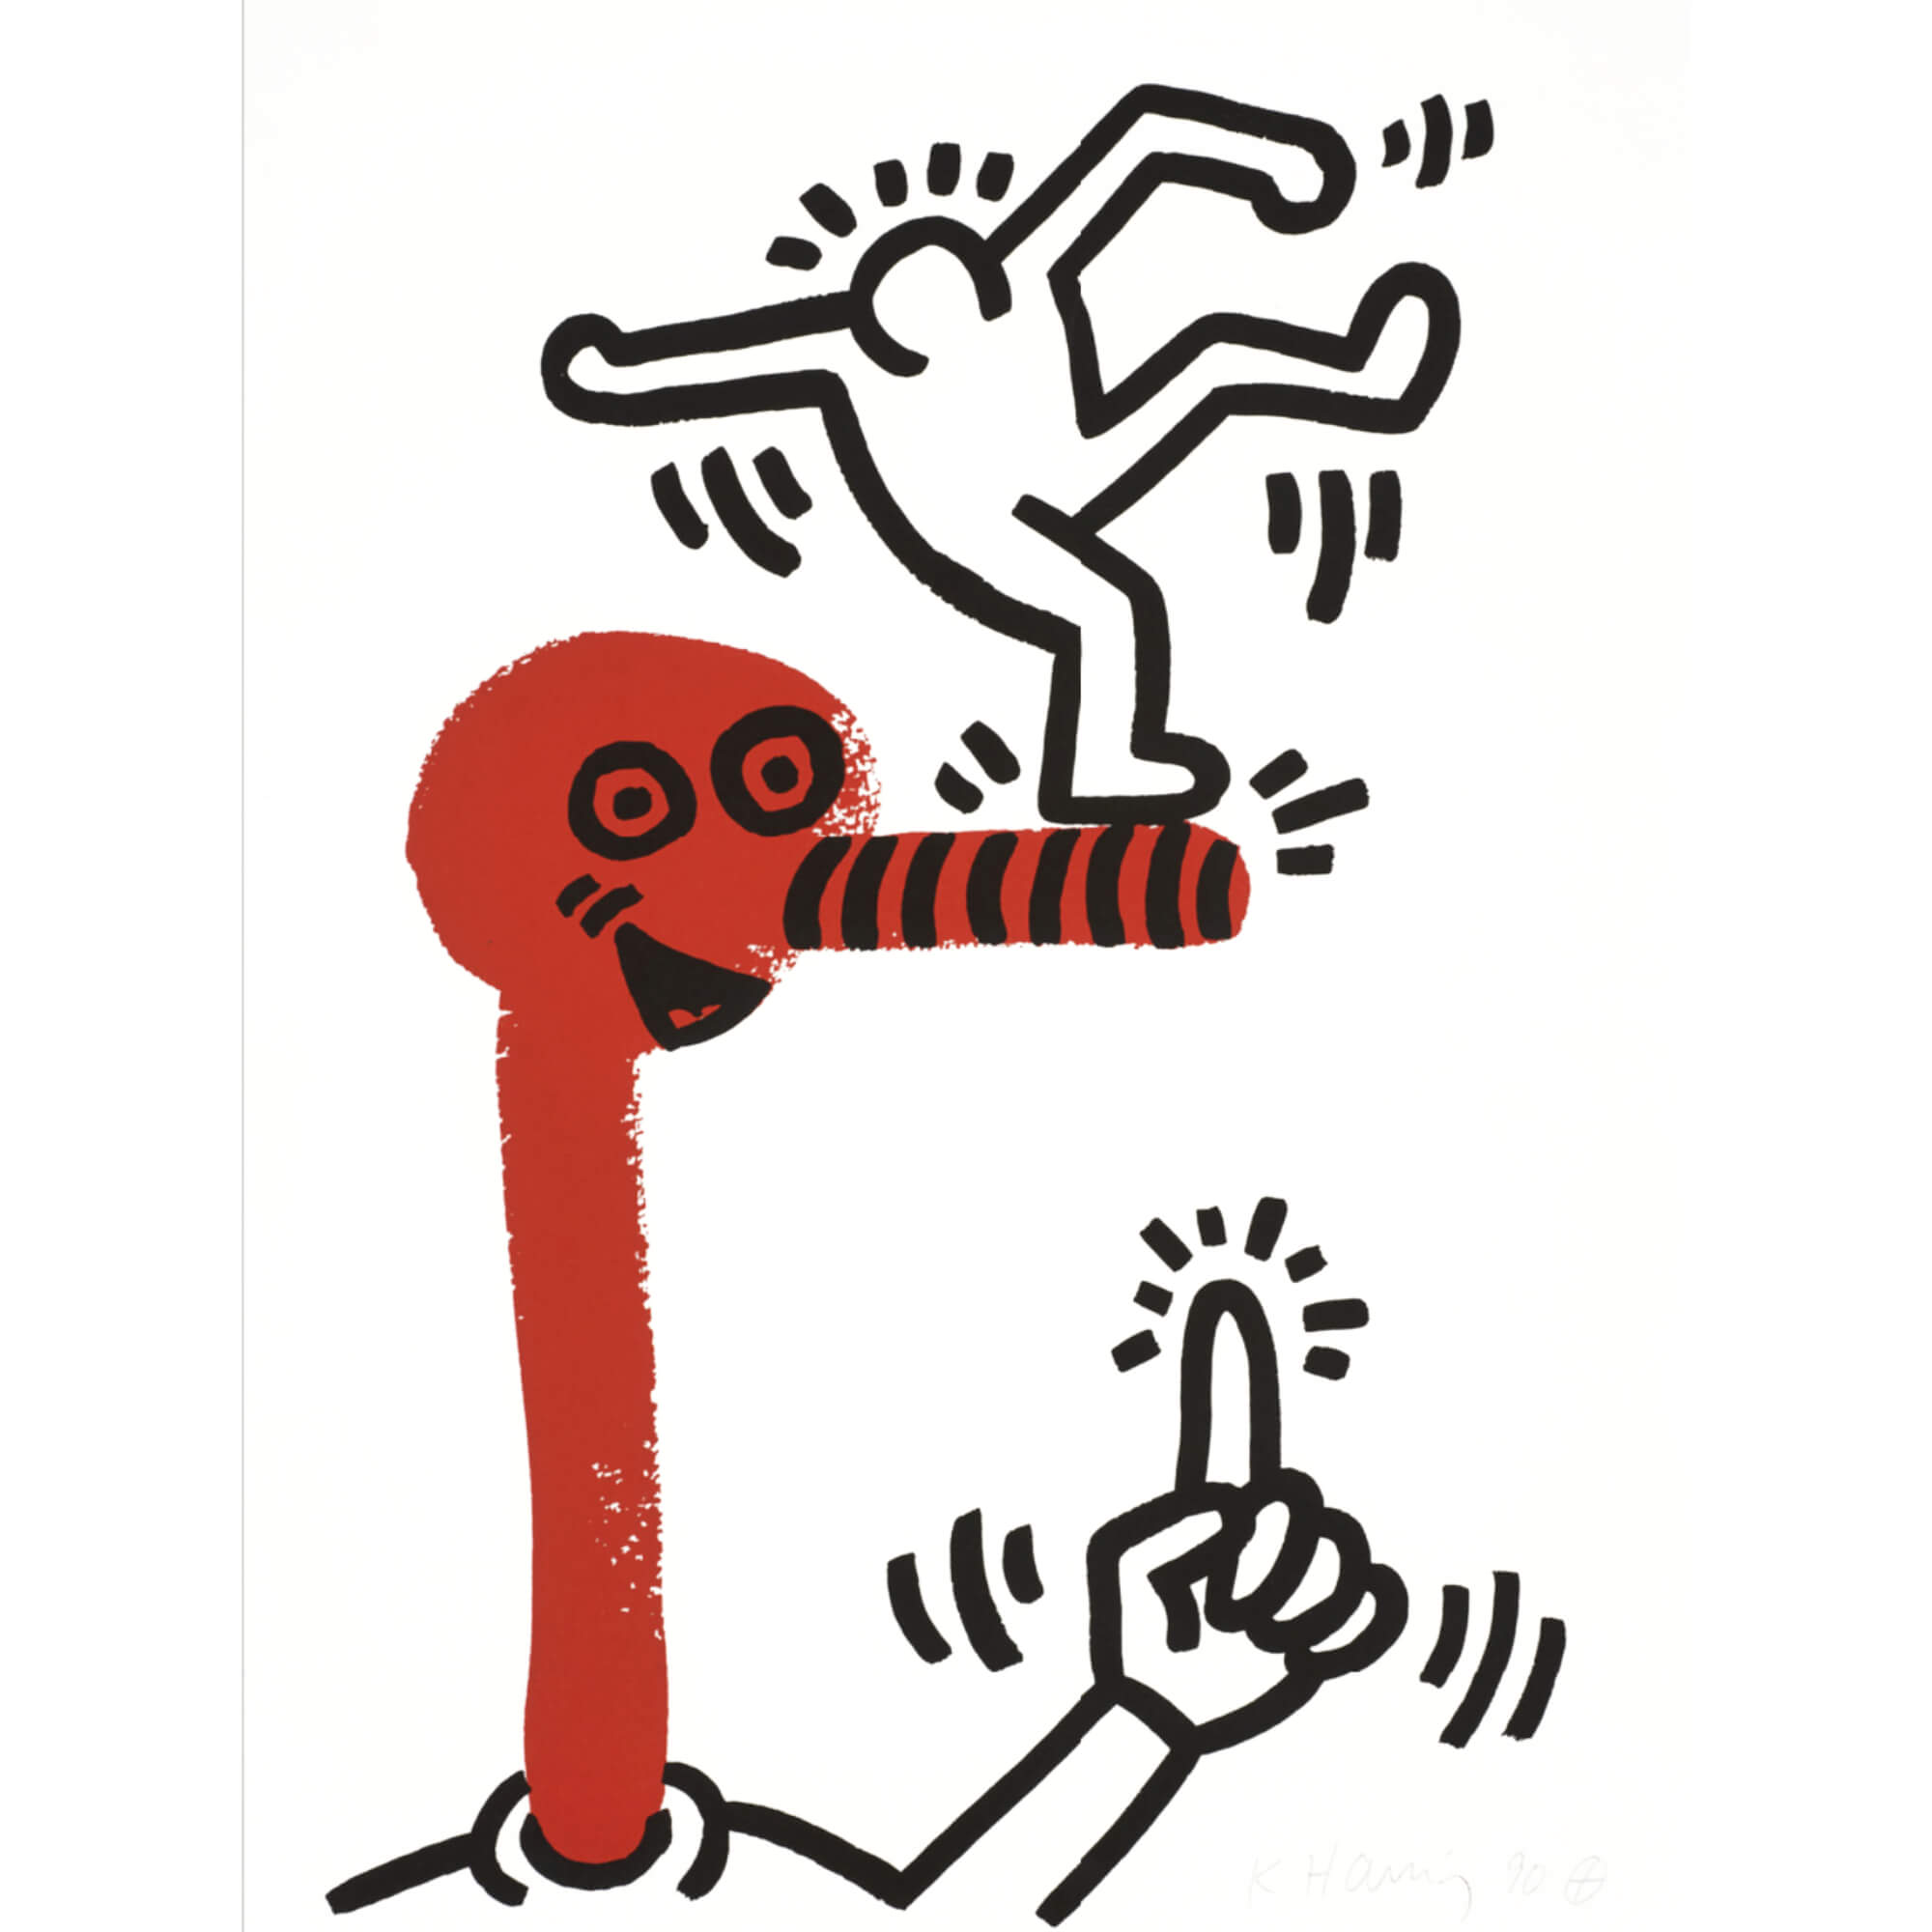 Keith Haring-The Story Of Red And Blue 1 - Keith Haring-art print